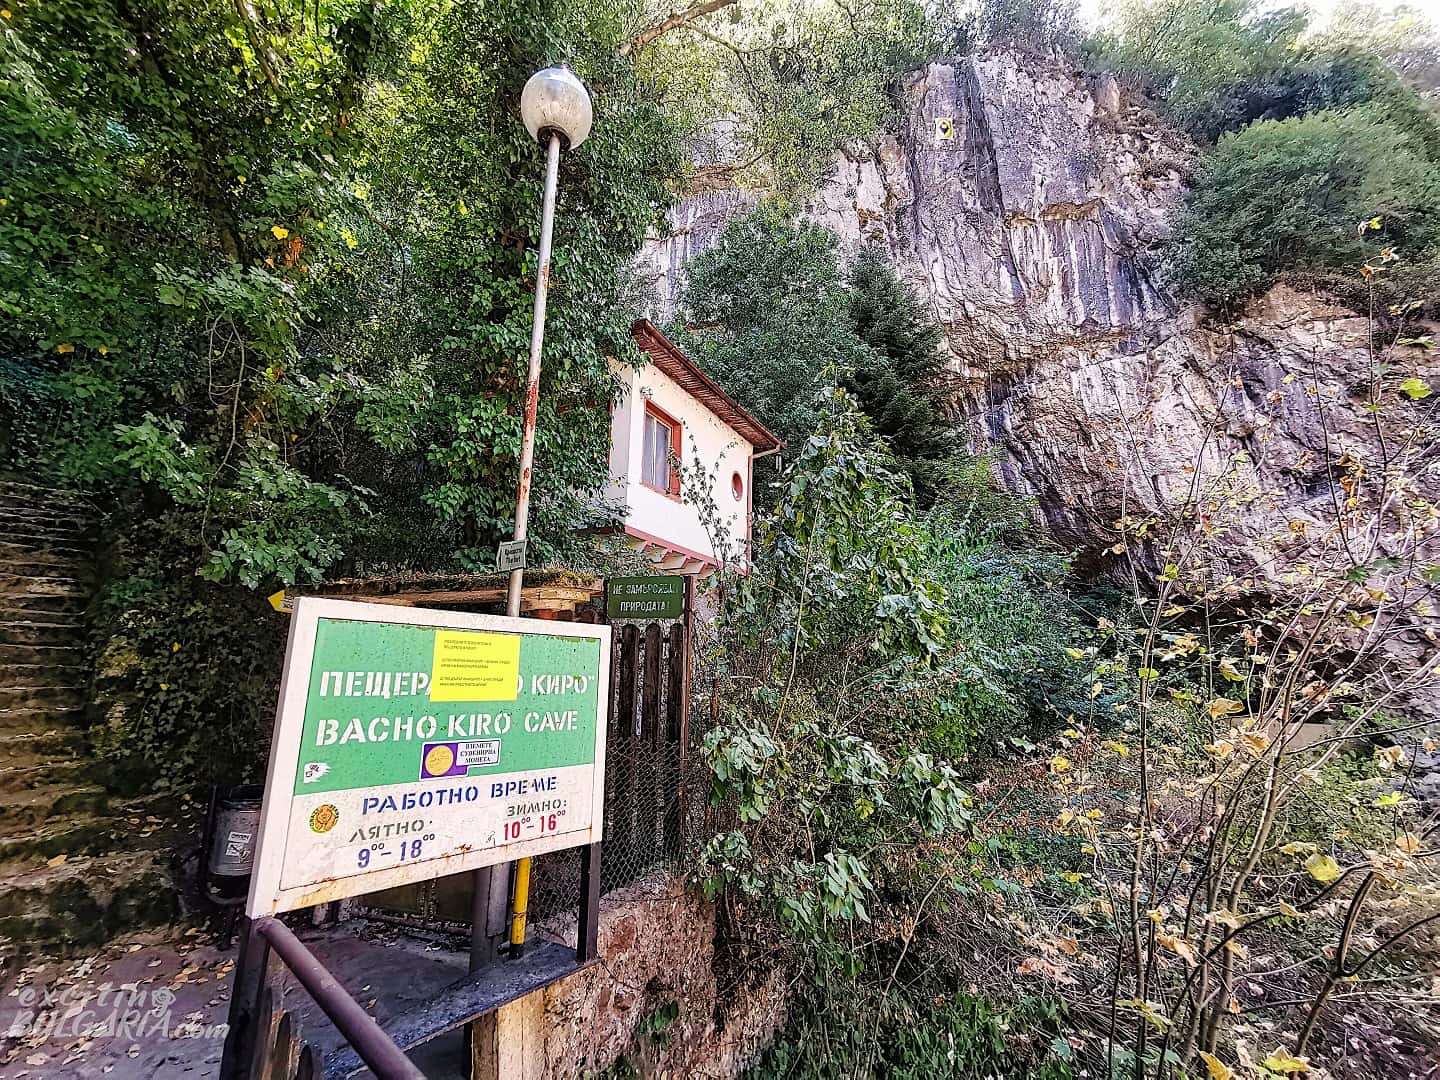 A sign with the opening hours of the Bacho Kiro cave